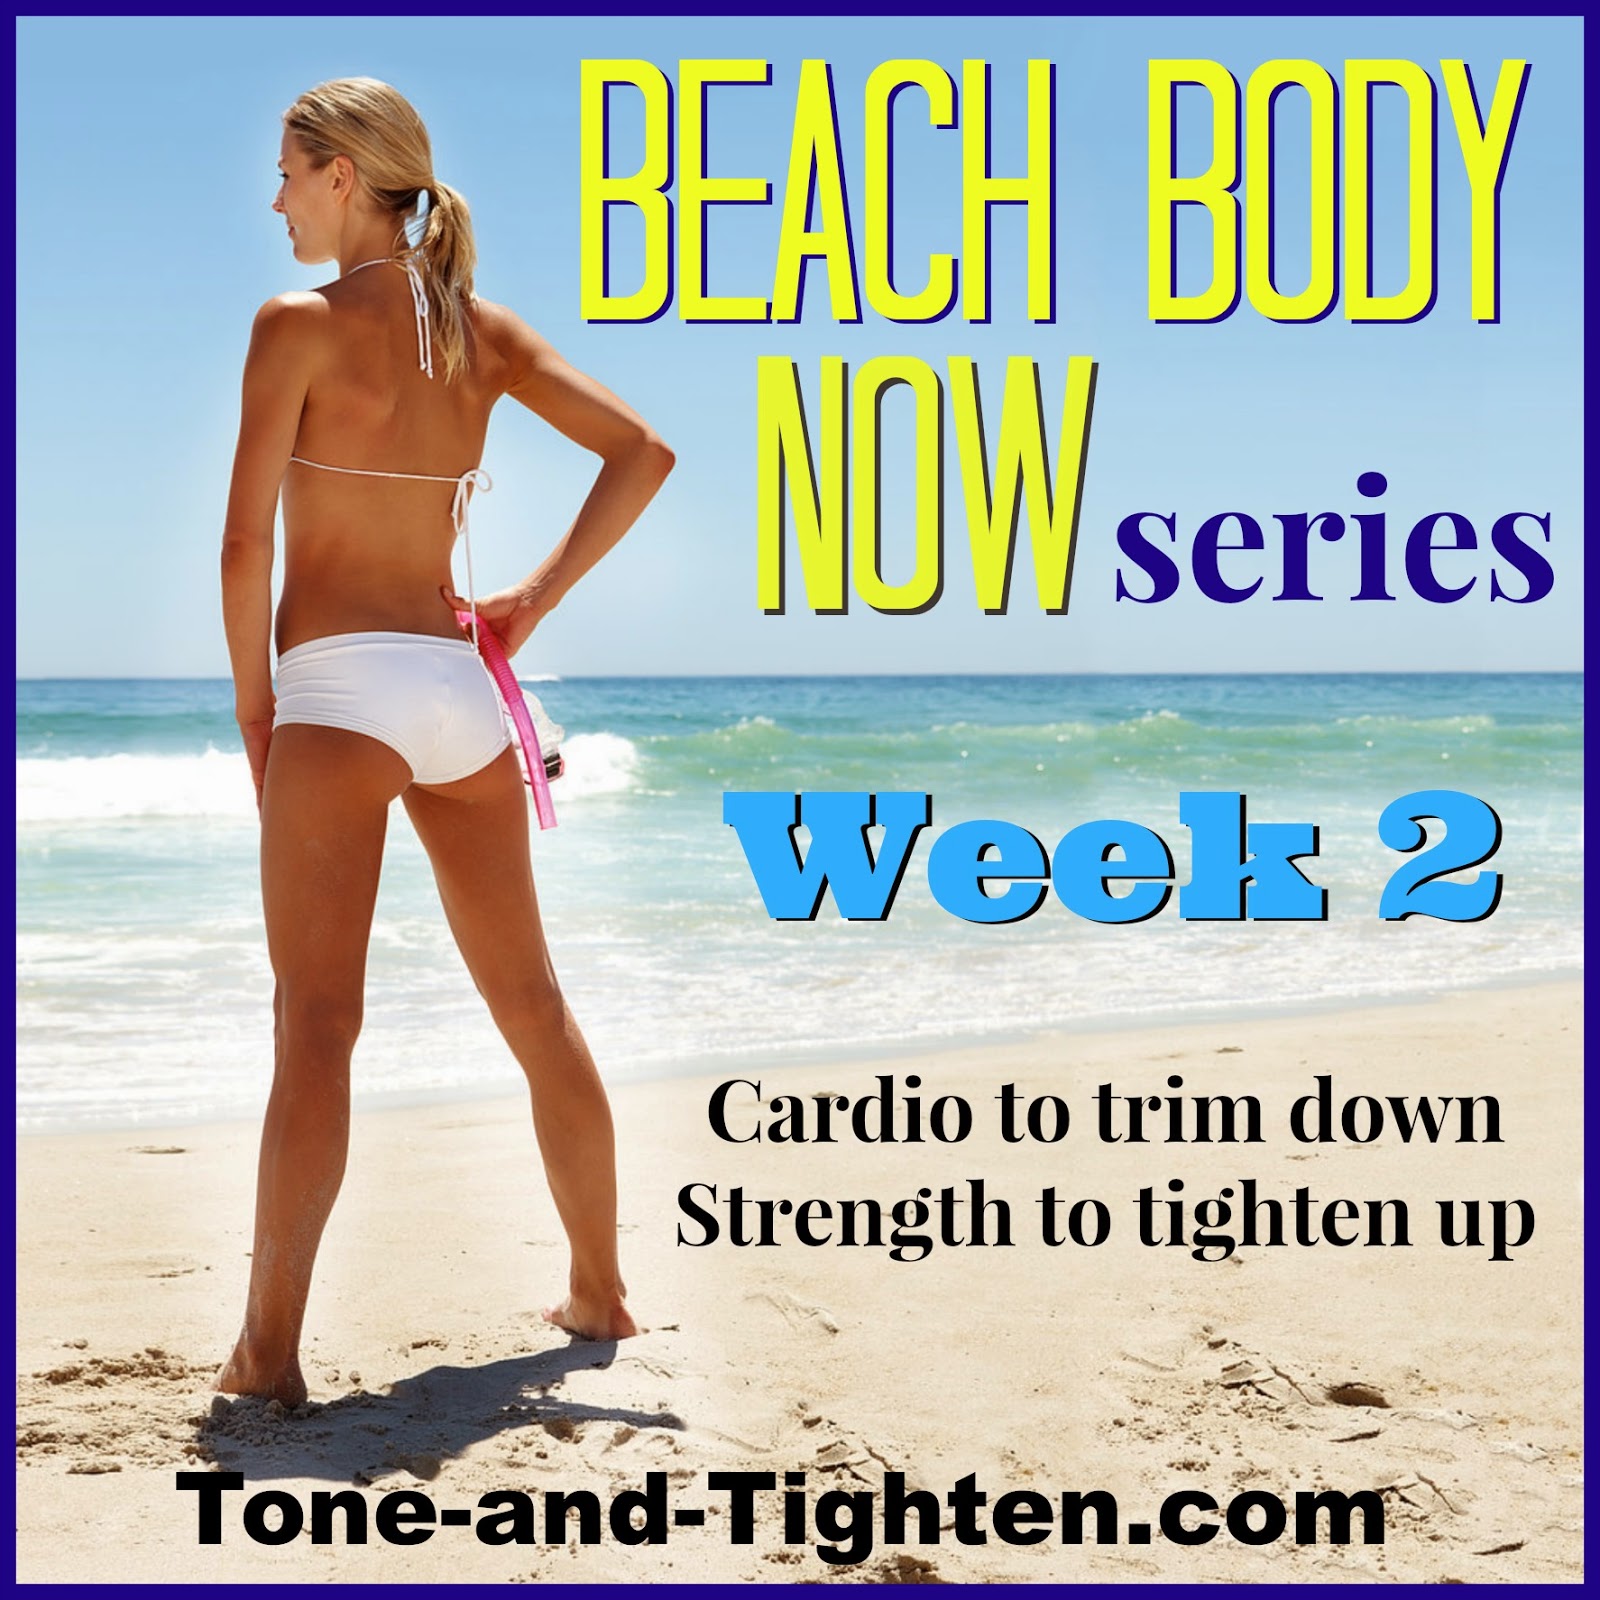 https://tone-and-tighten.com/2014/04/beach-body-now-week-2-workout-series-to-get-you-beach-ready.html